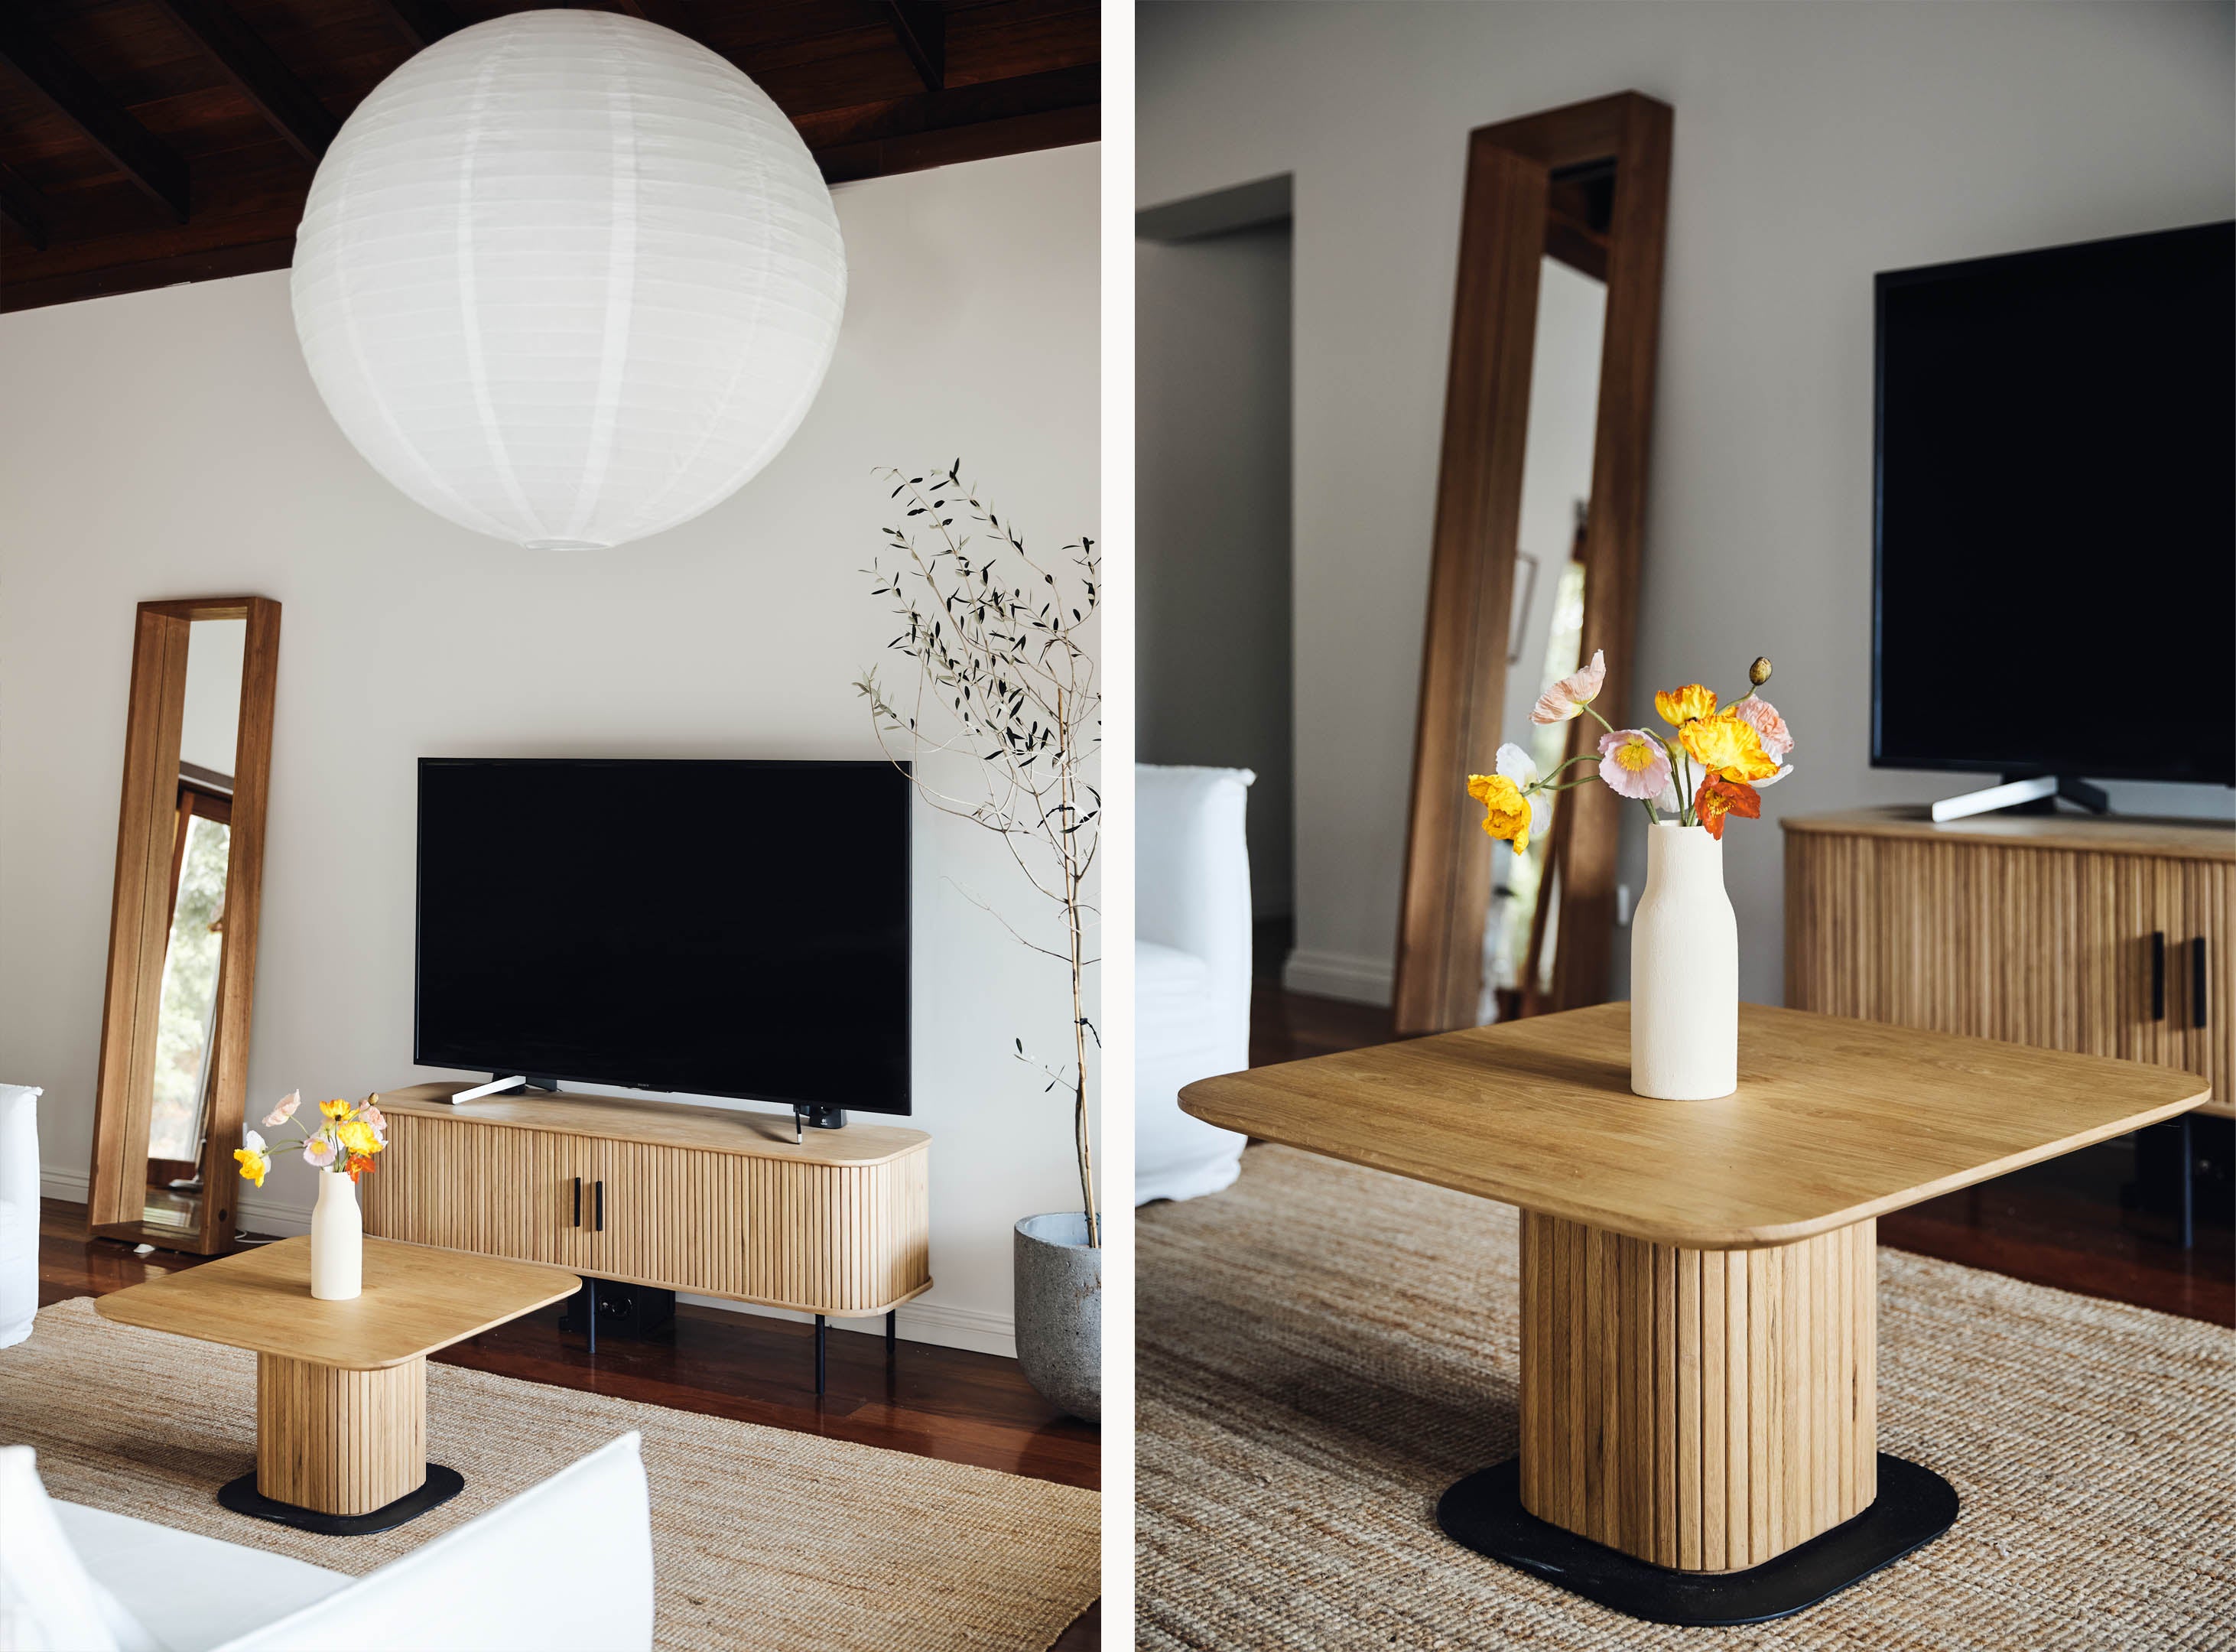 Shop The Ipanema TV Unit & Ipanema Coffee Table in Sydney, Melbourne & Online.